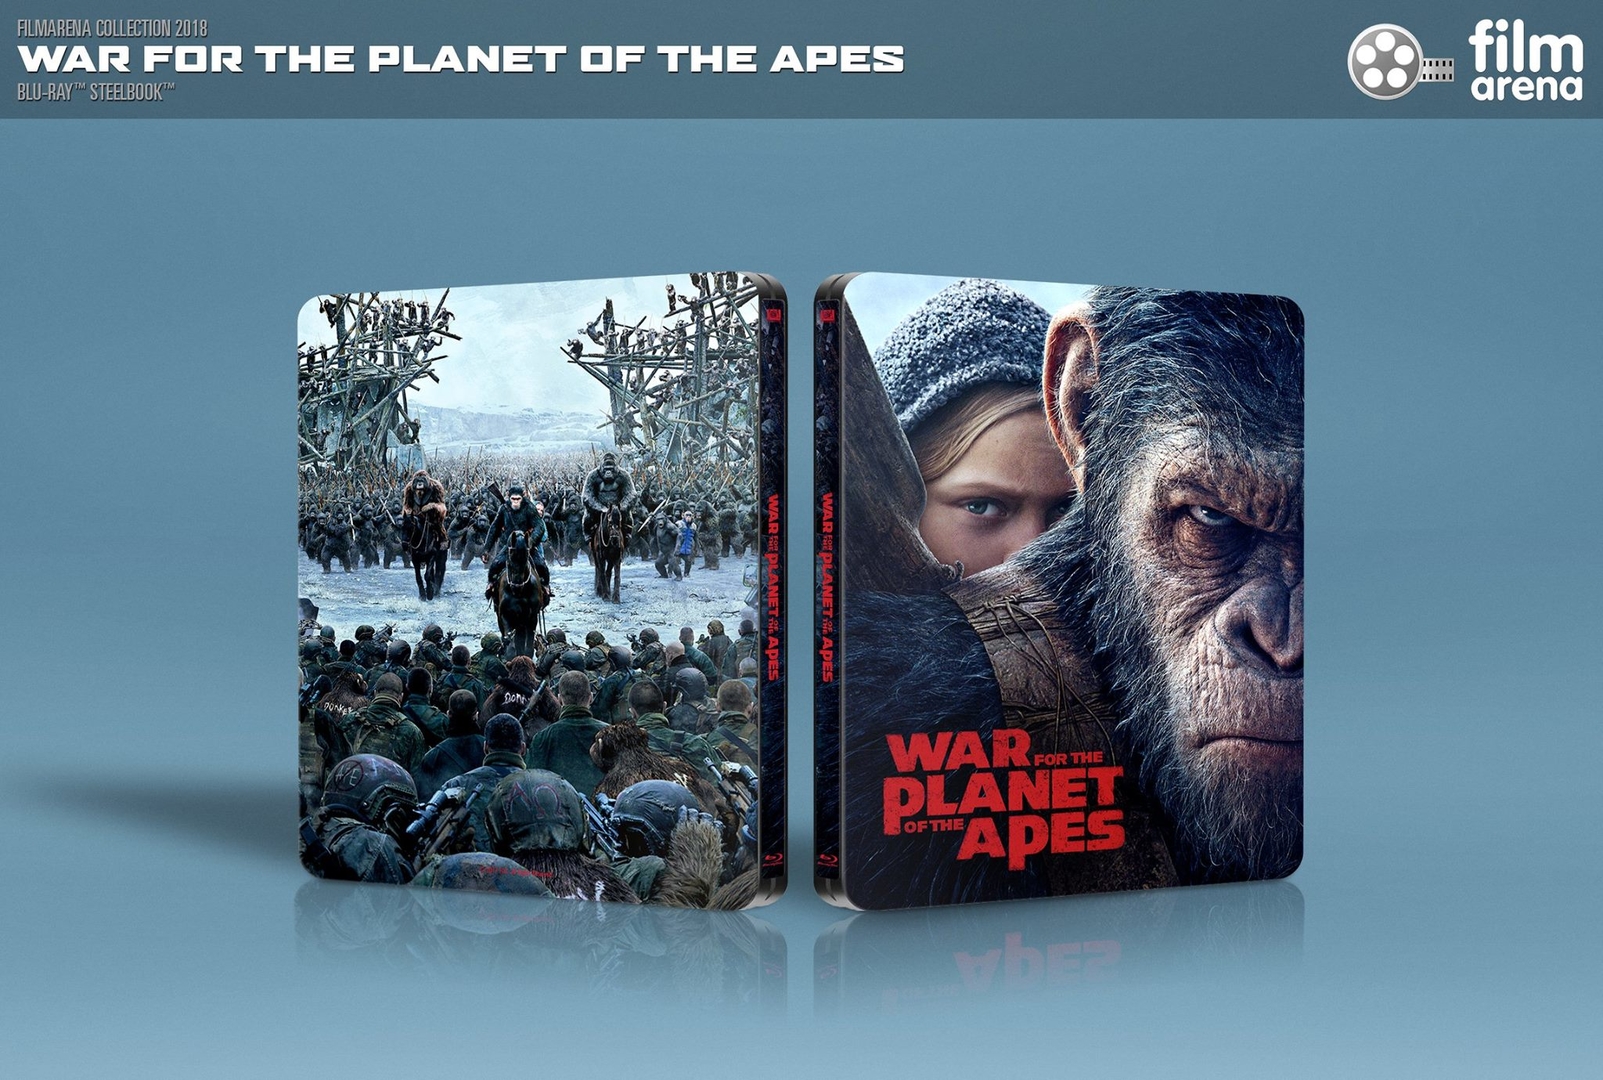 095_-_War_for_the_Planet_of_the_Apes_WEA_1_.jpg